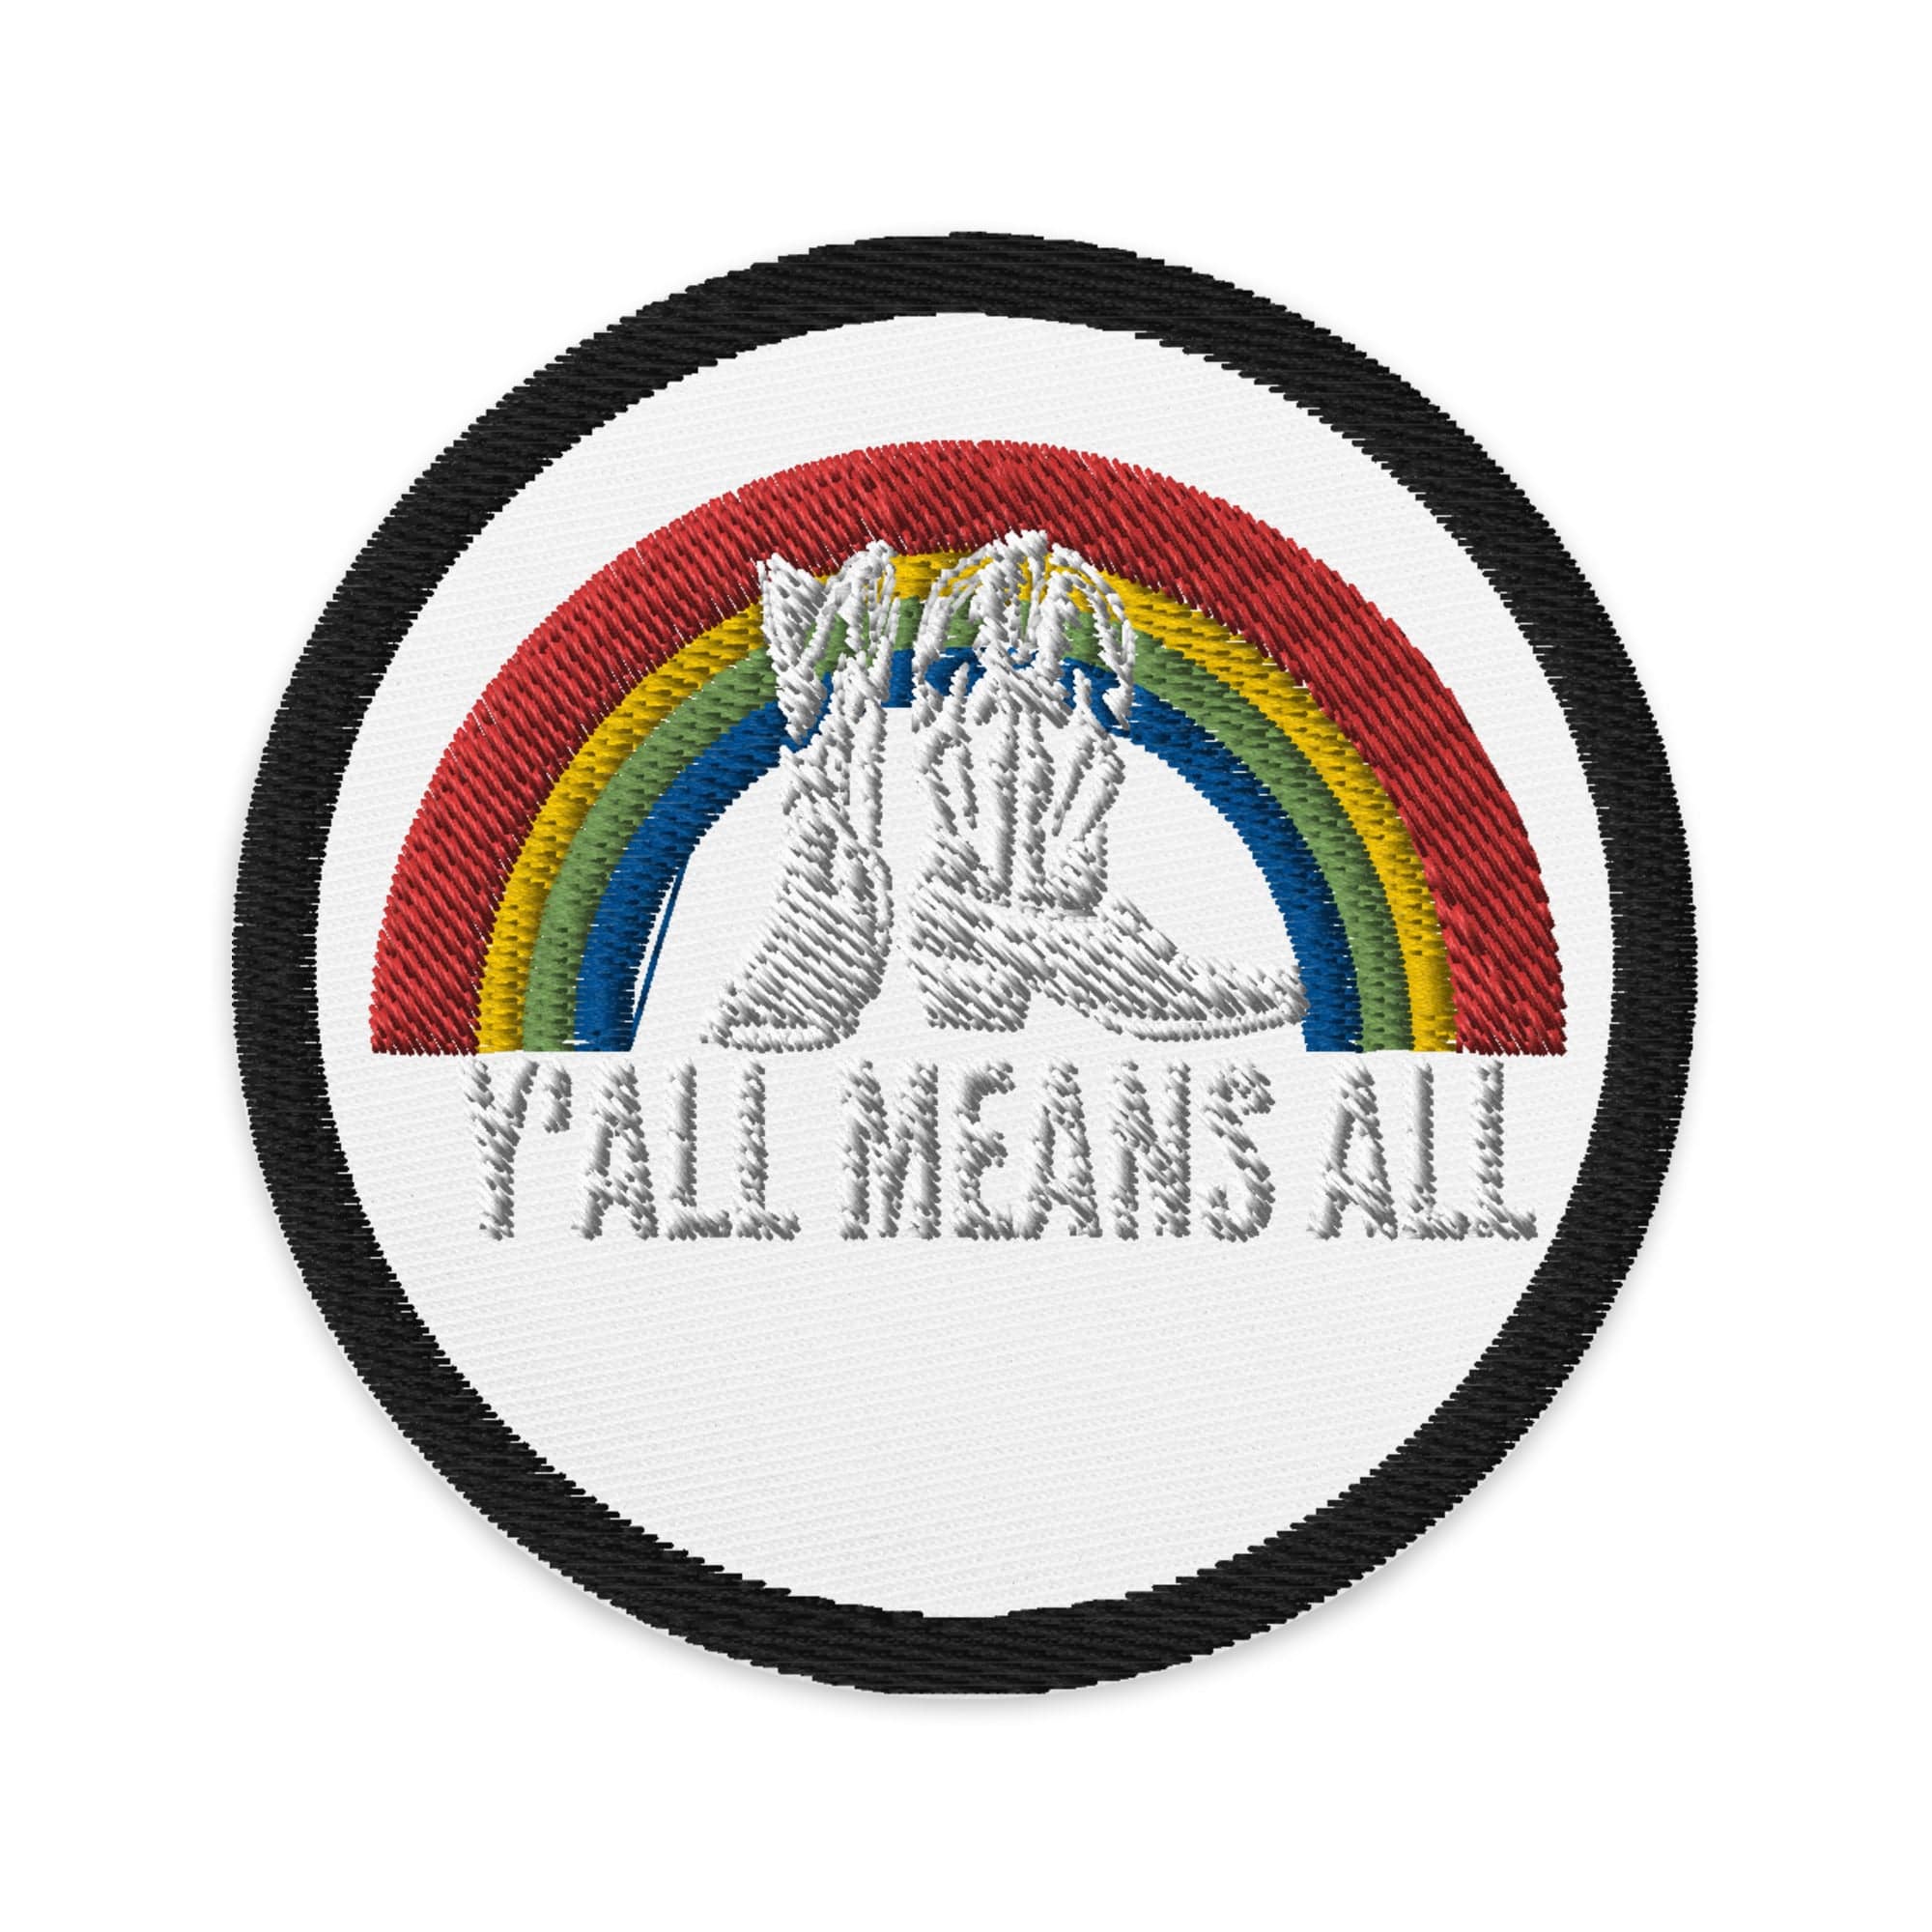 Ya'll Means All Embroidered patch